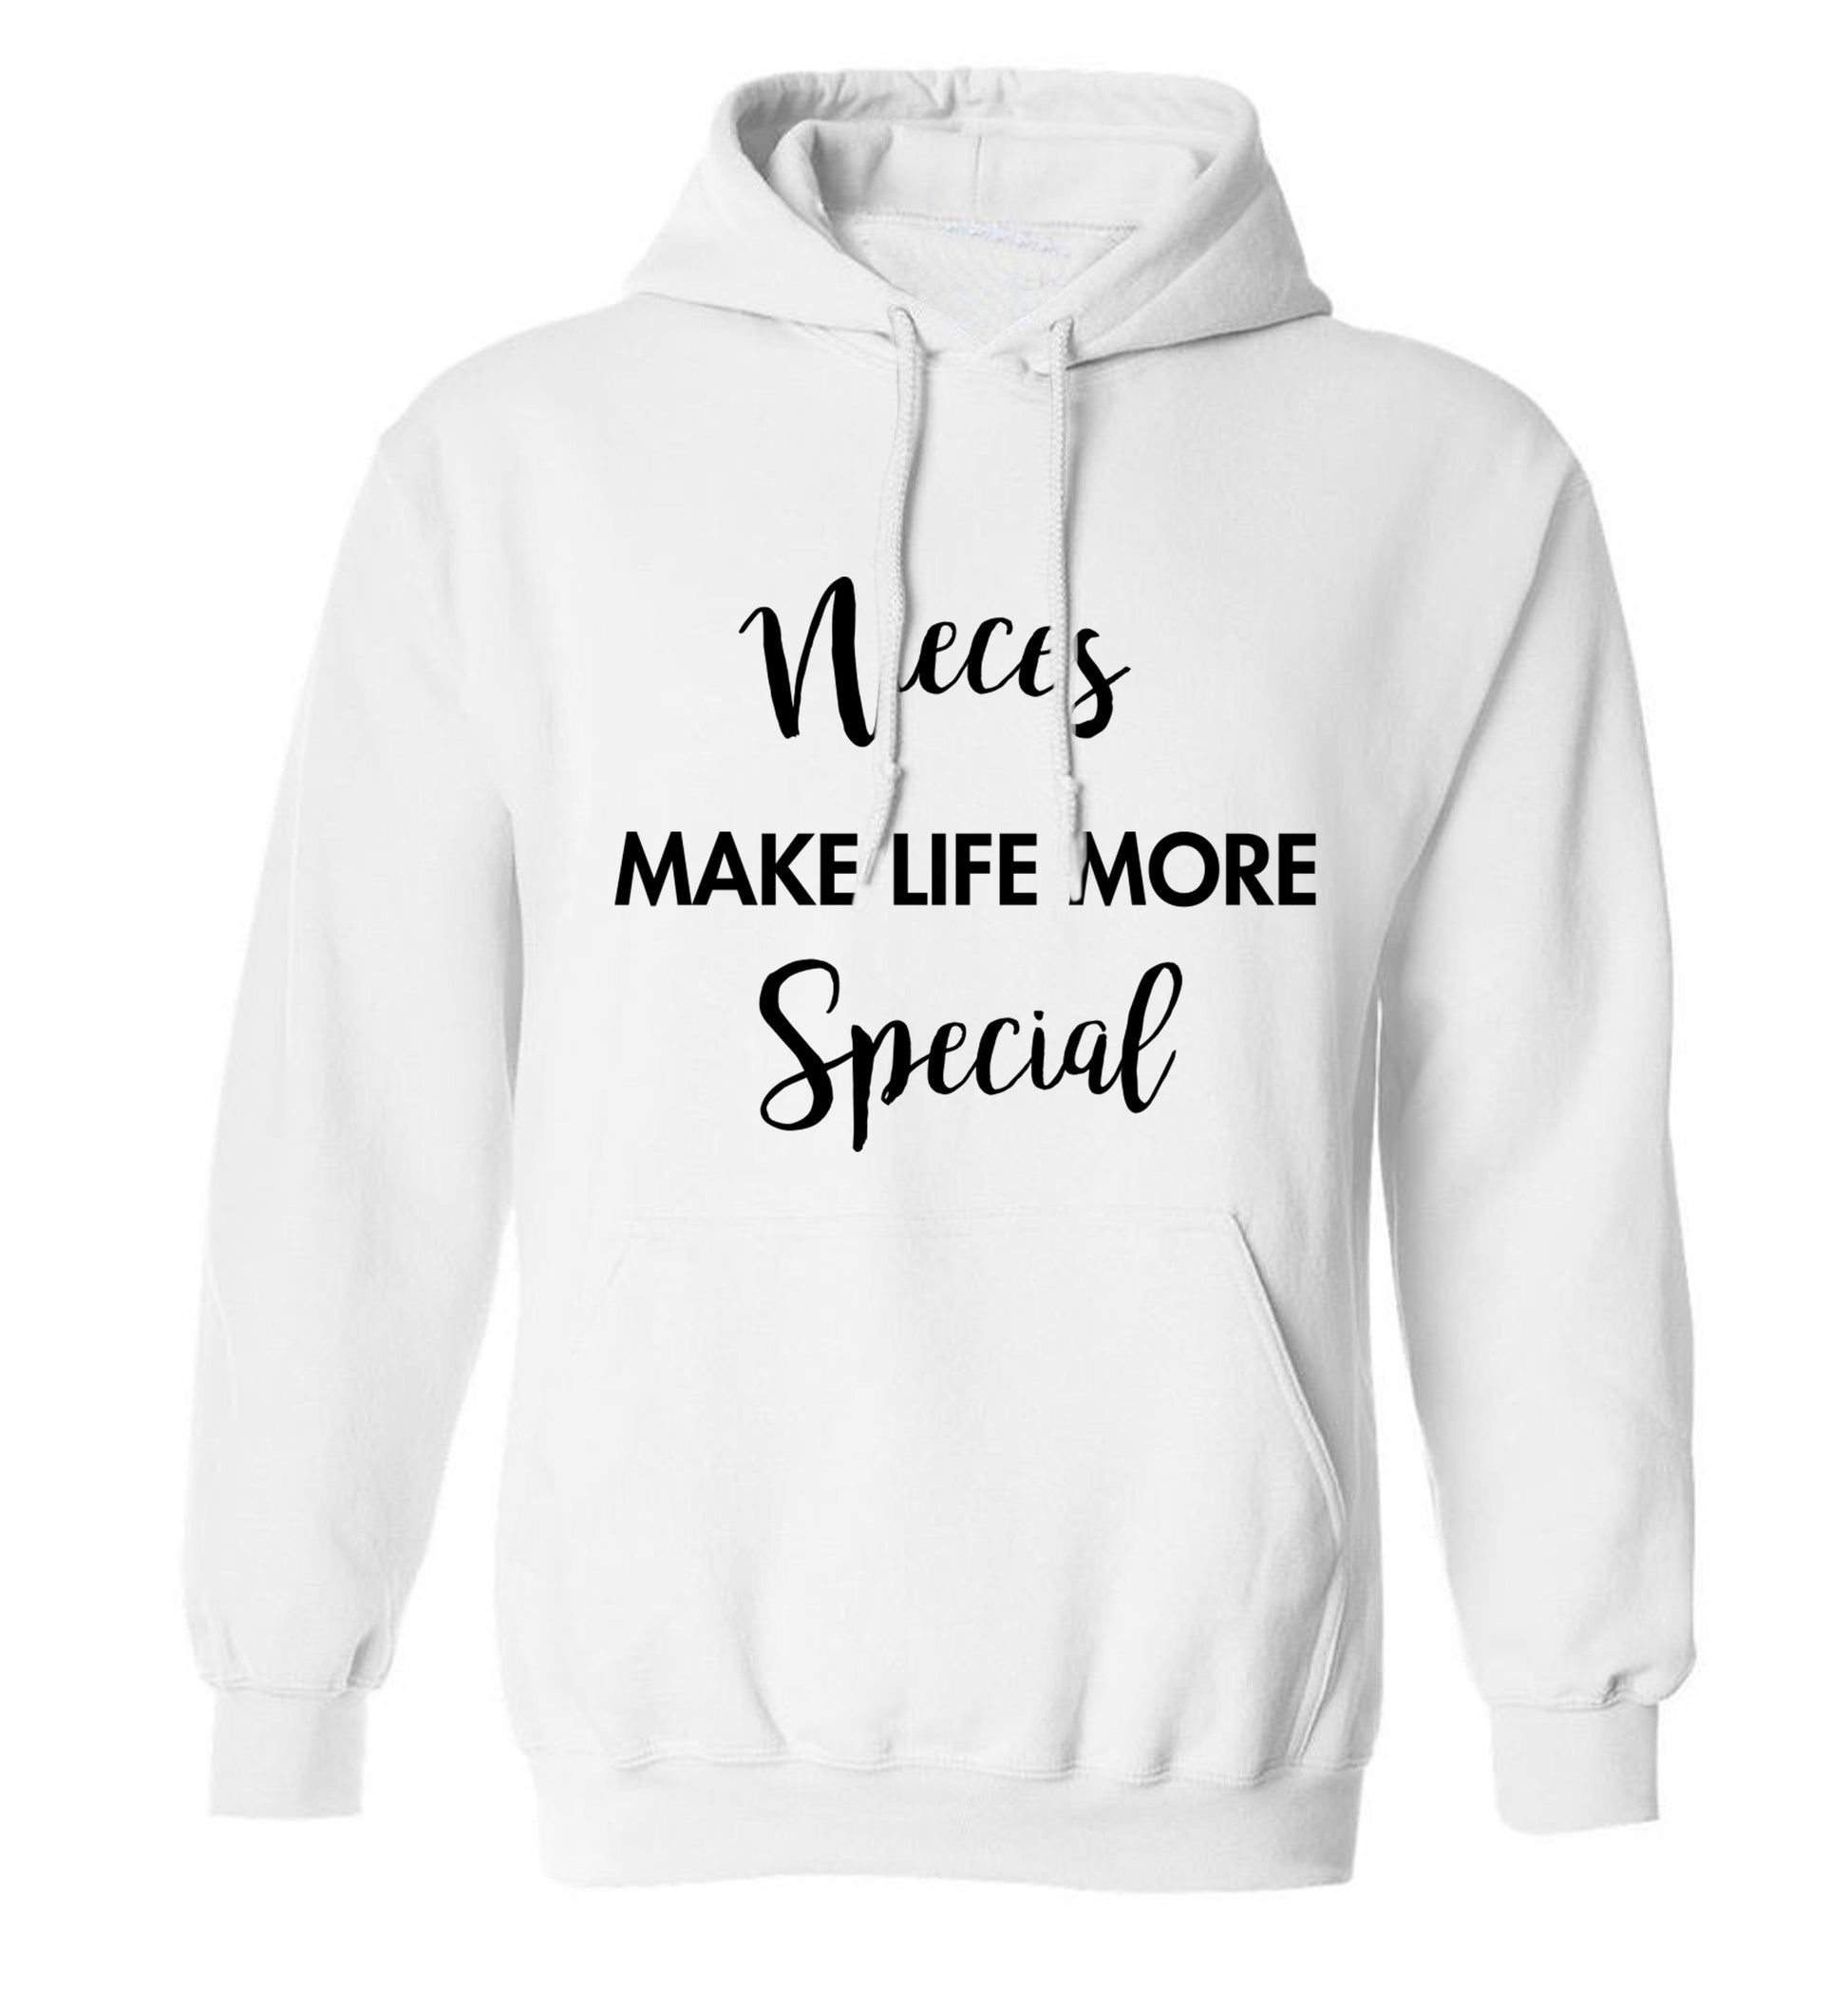 Nieces make life more special adults unisex white hoodie 2XL